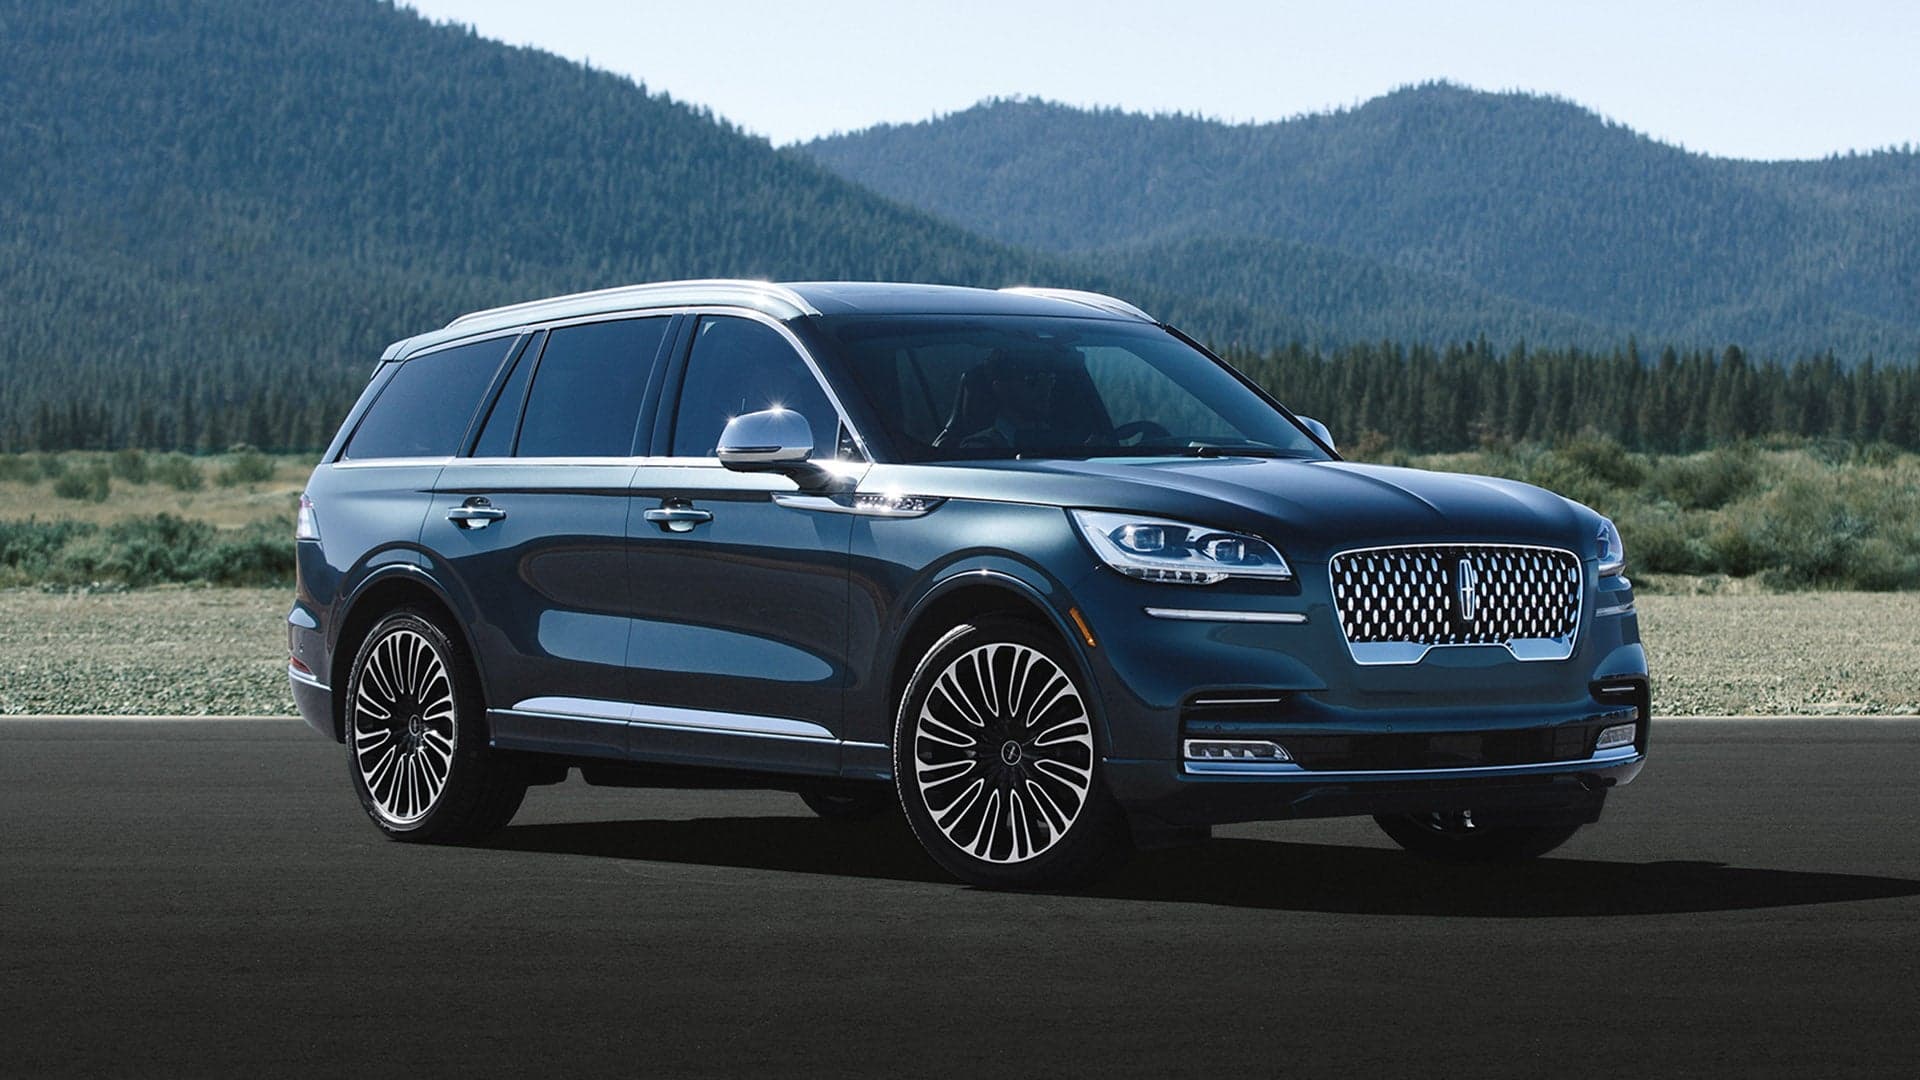 2020 Lincoln Aviator Starts Near $52,000 and Can be Optioned to Imposing $90K